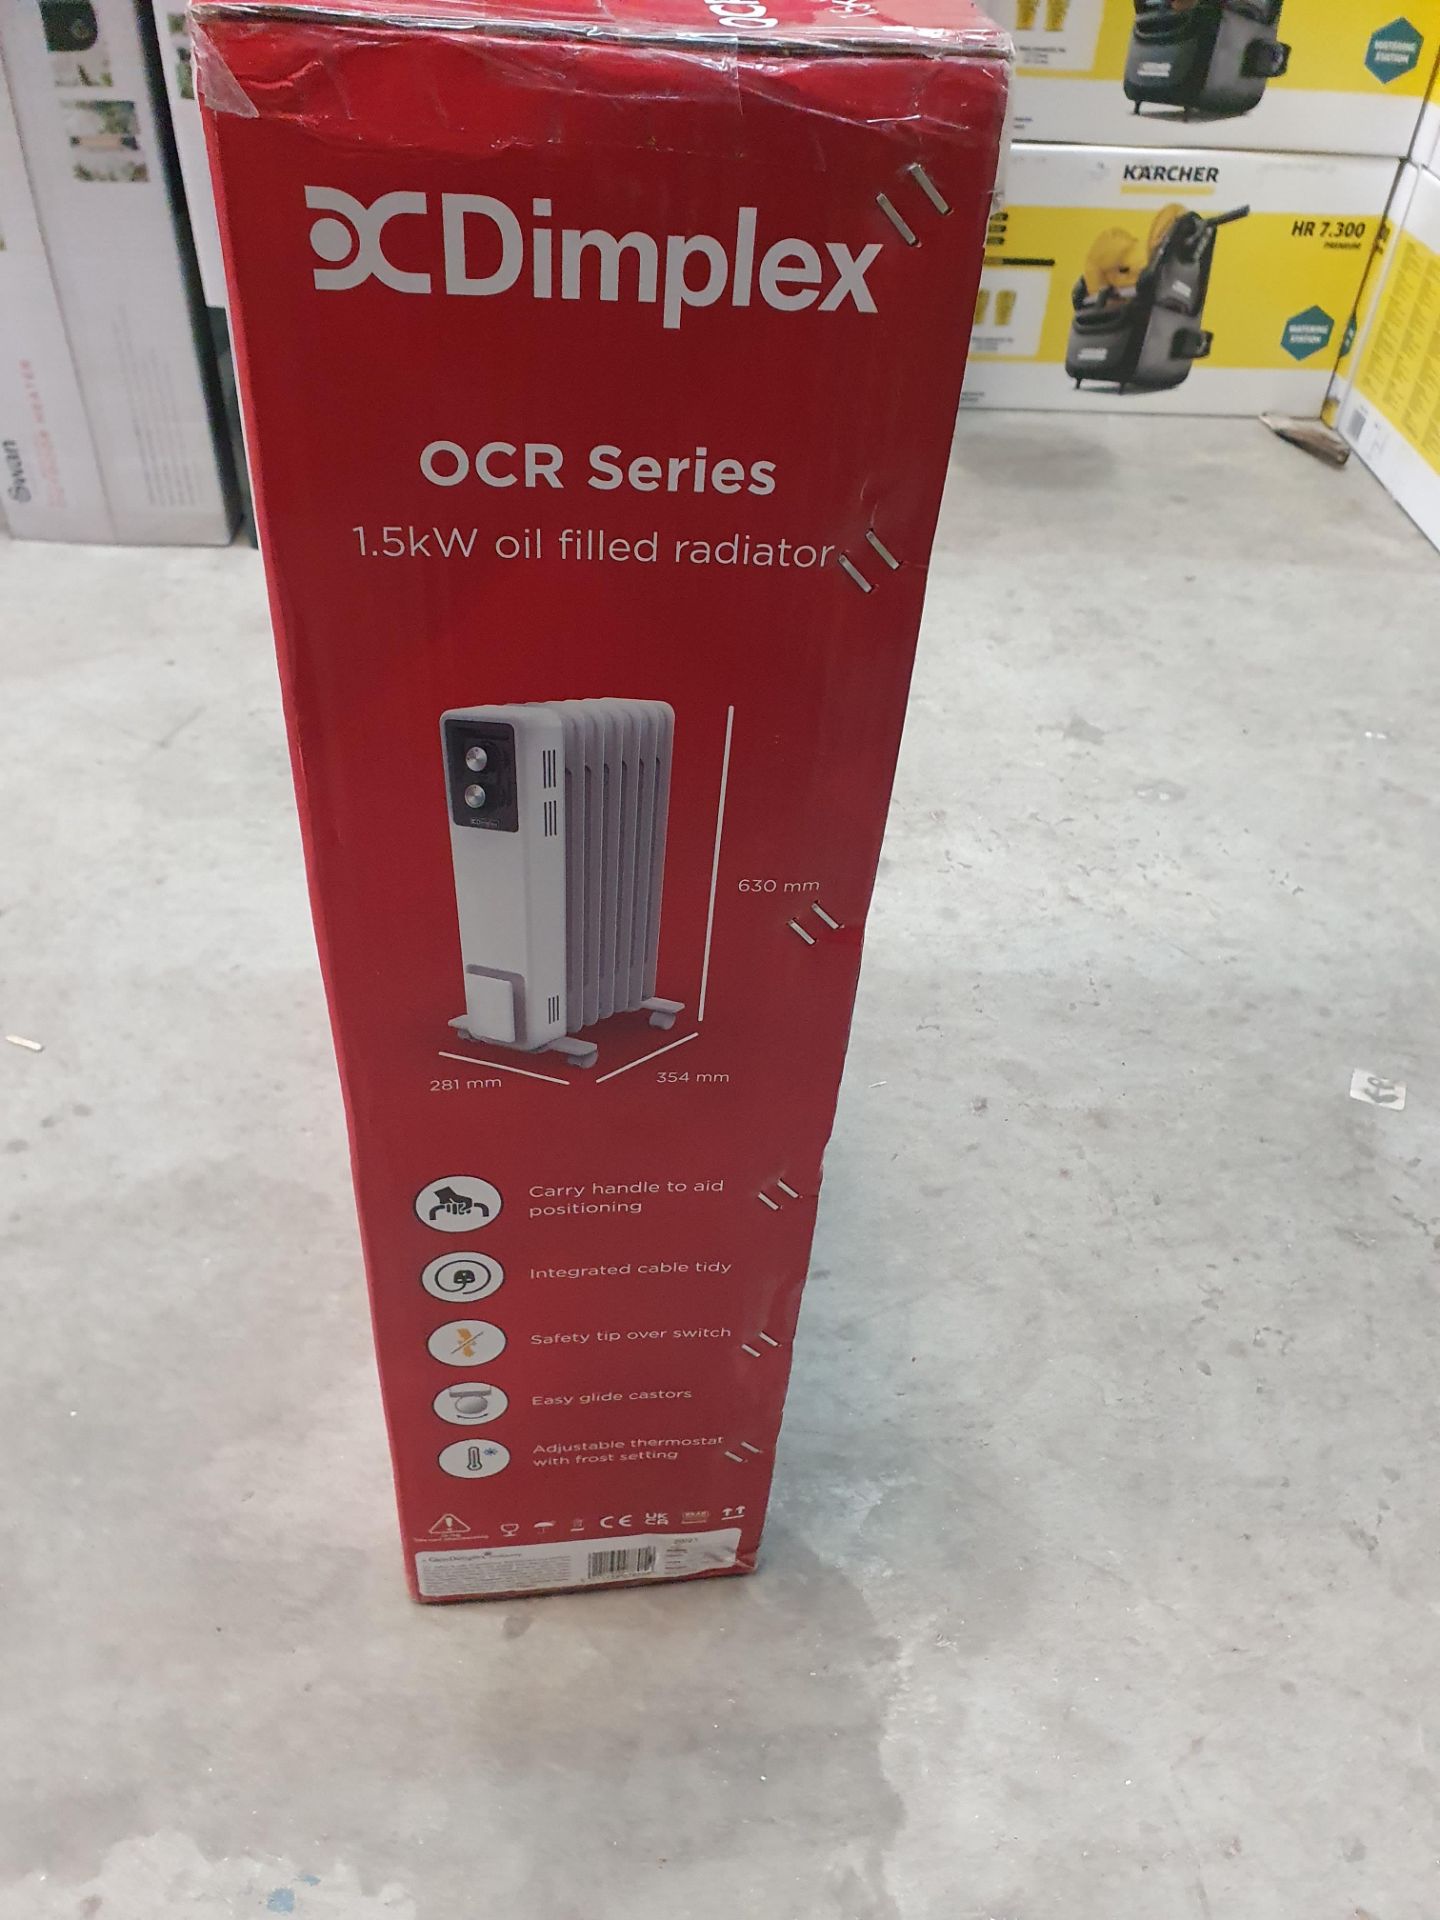 * Dimplax 1.5Kw oil filled radiator OCR Series RRP £65 - Image 3 of 3